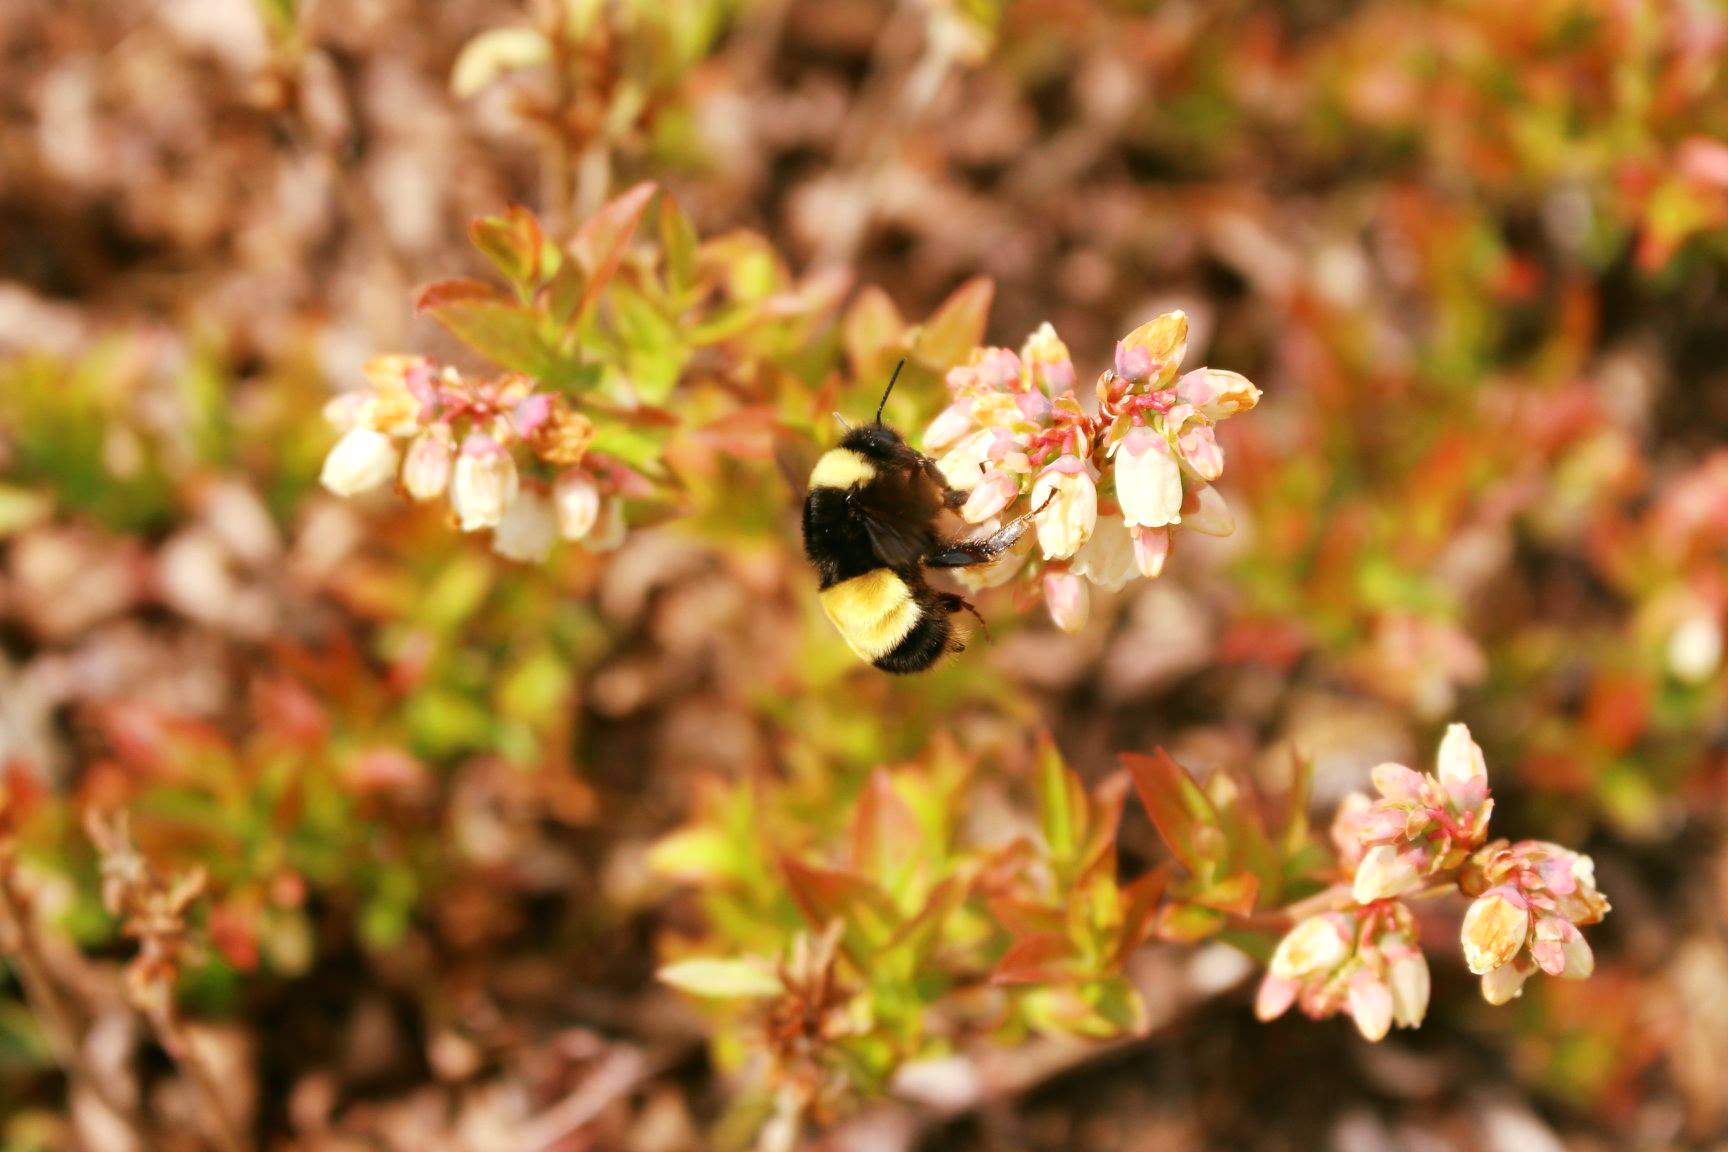 A fuzzy bumble bee with black and yellow stripes collects pollen from a pinkish blossom, in a landscape tinged red by changing leaves.